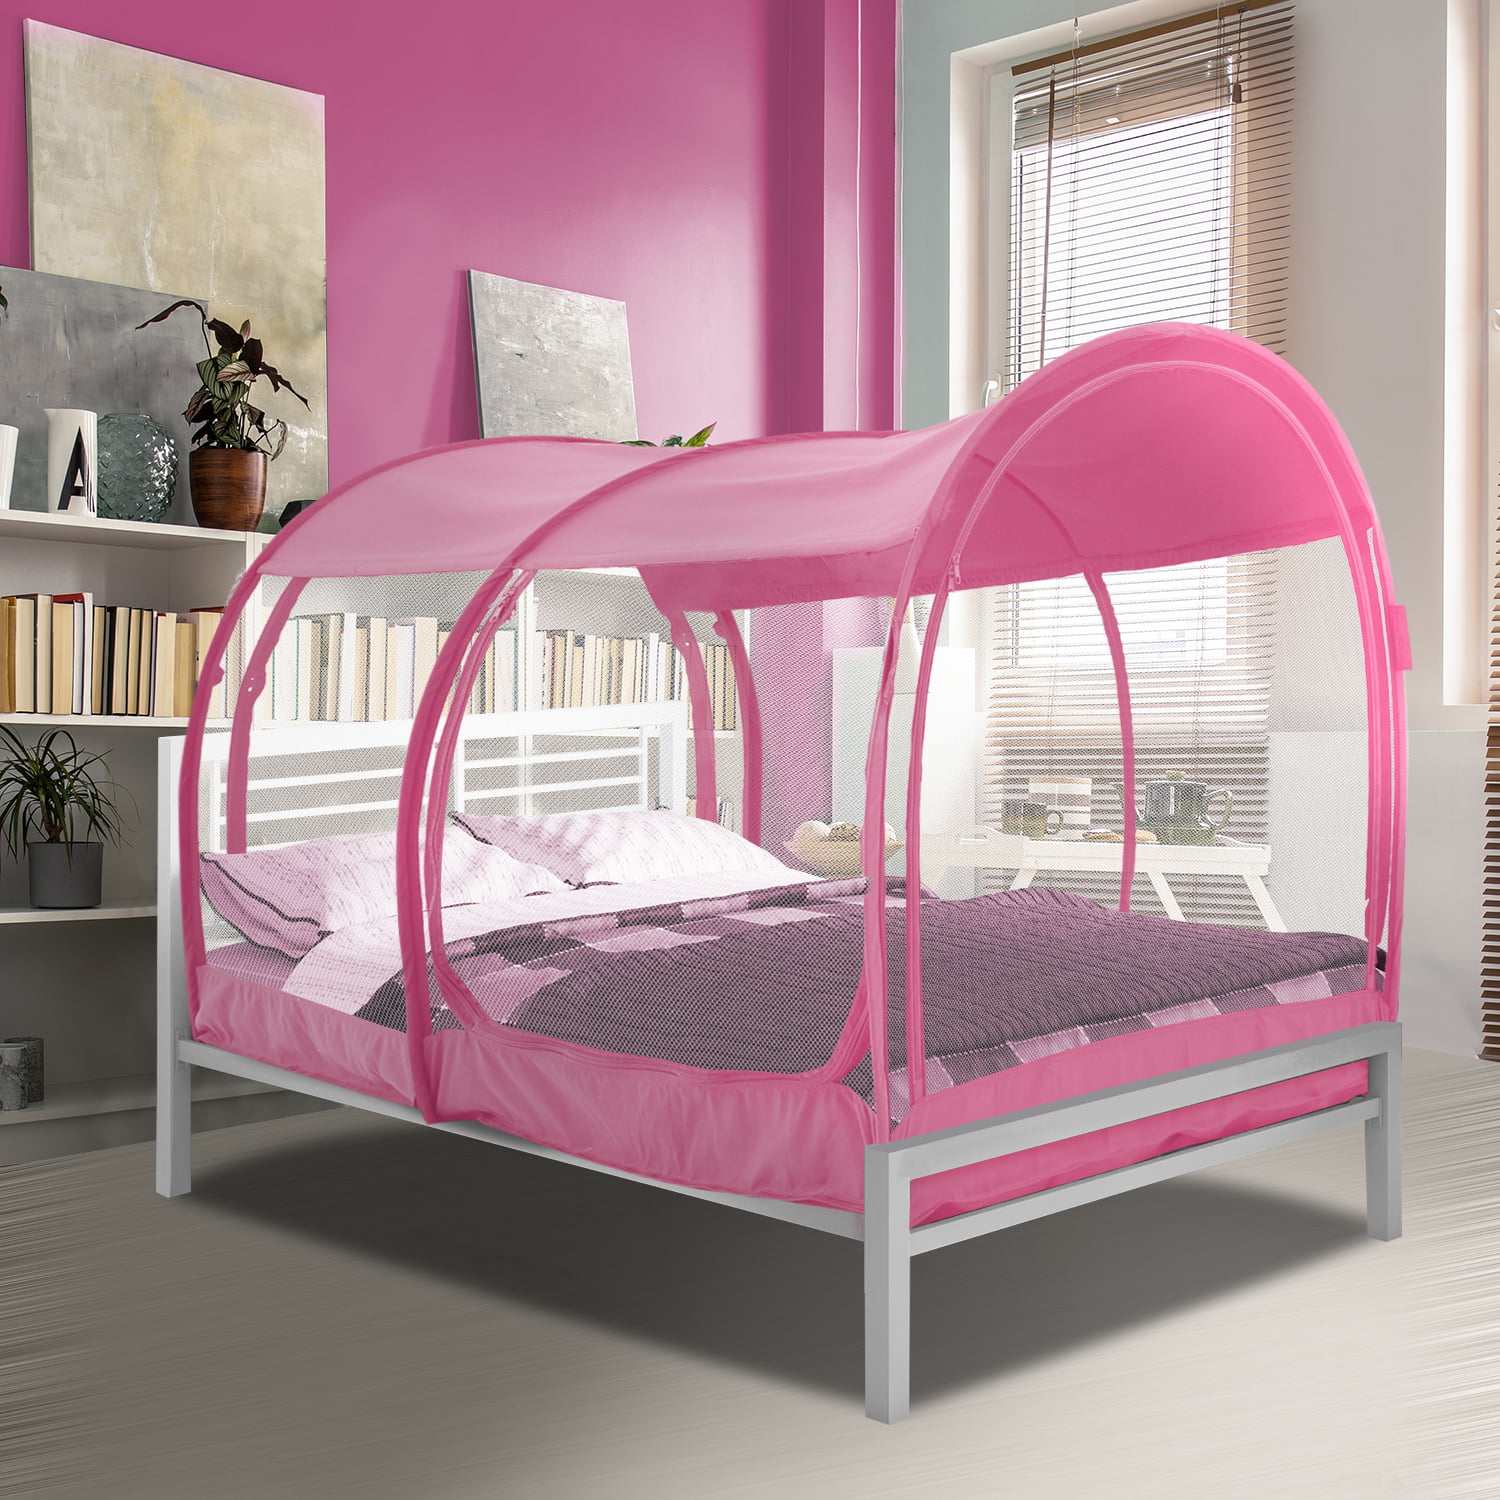 Bed Tent Mosquito Net Privacy Space, Mosquito Net For Bunk Bed